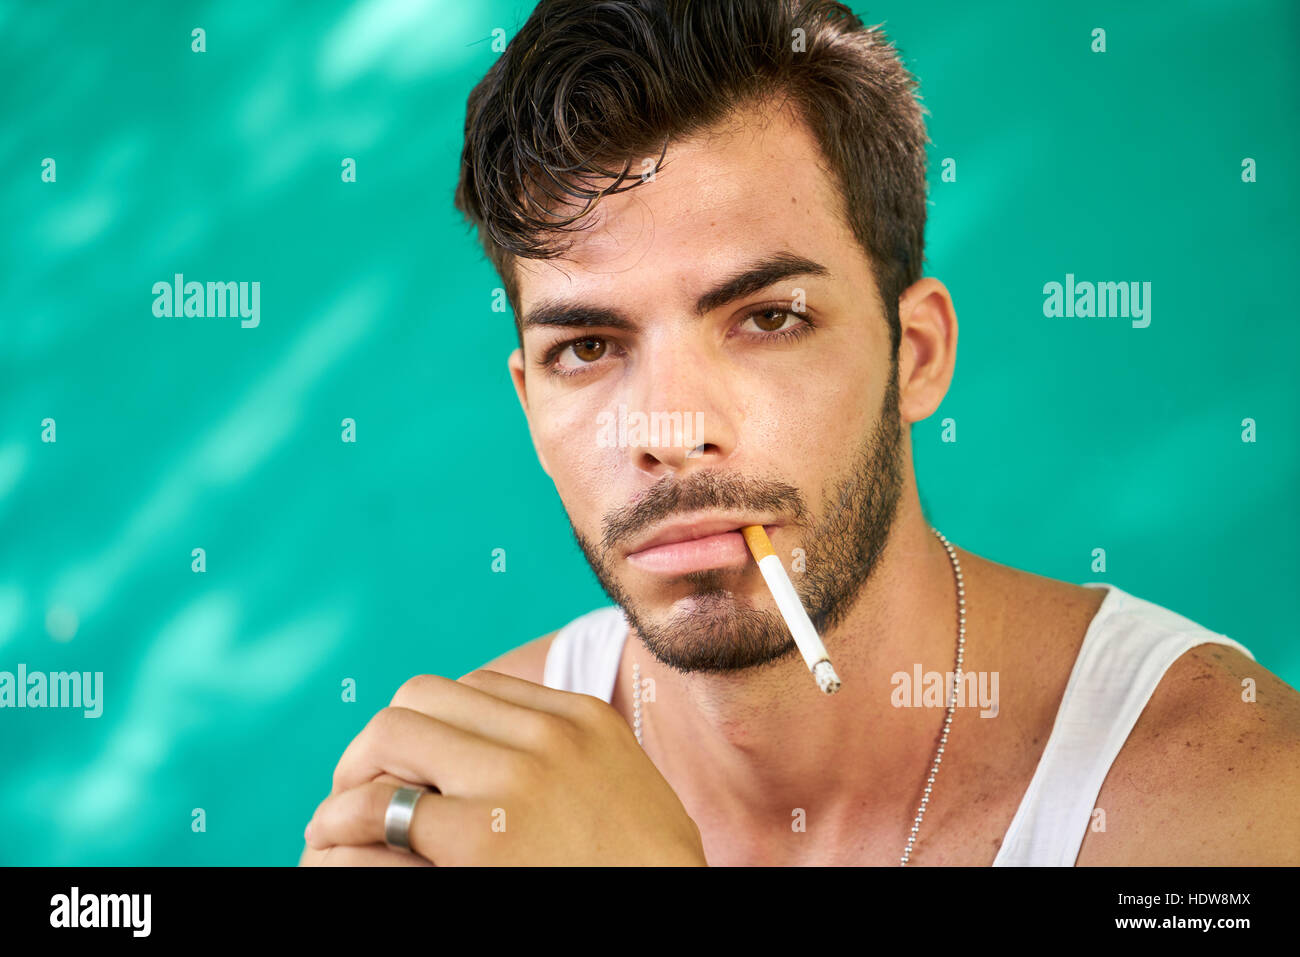 Real Cuban people and emotions, portrait of young hispanic man from Havana, Cuba looking at camera with serious expression, smoking cigarette and blow Stock Photo